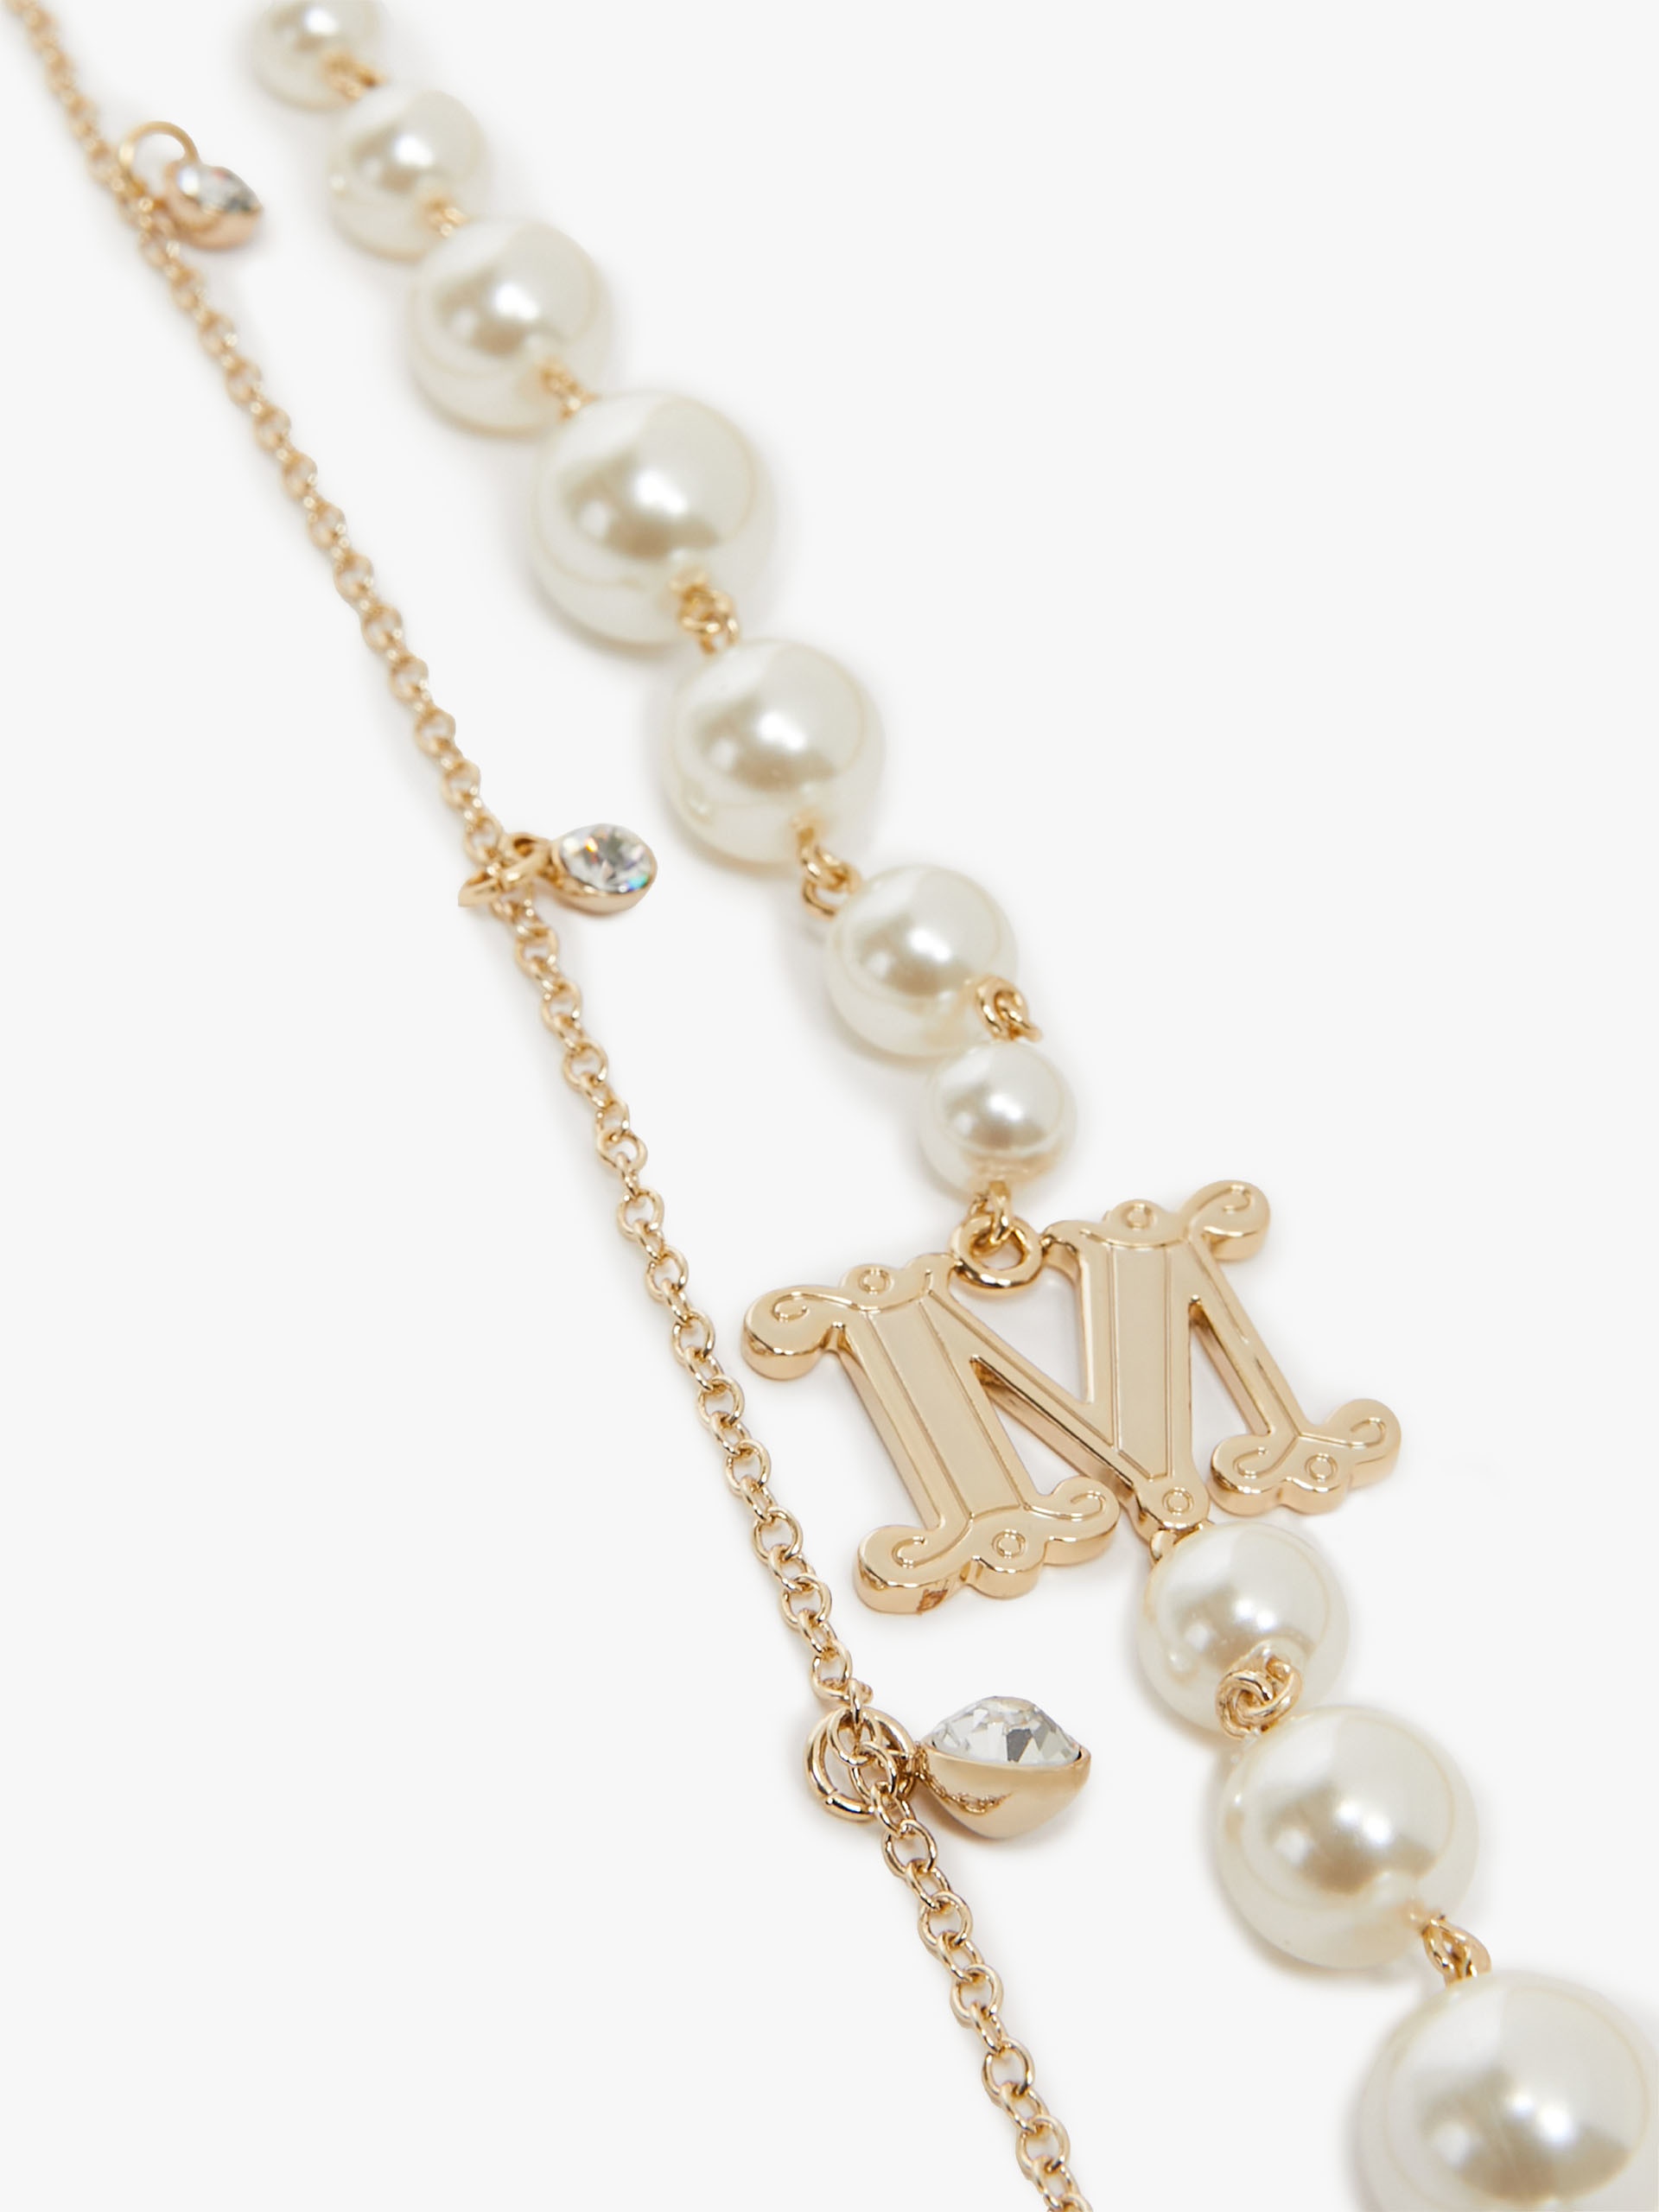 Double-strand necklace with pearls - 2